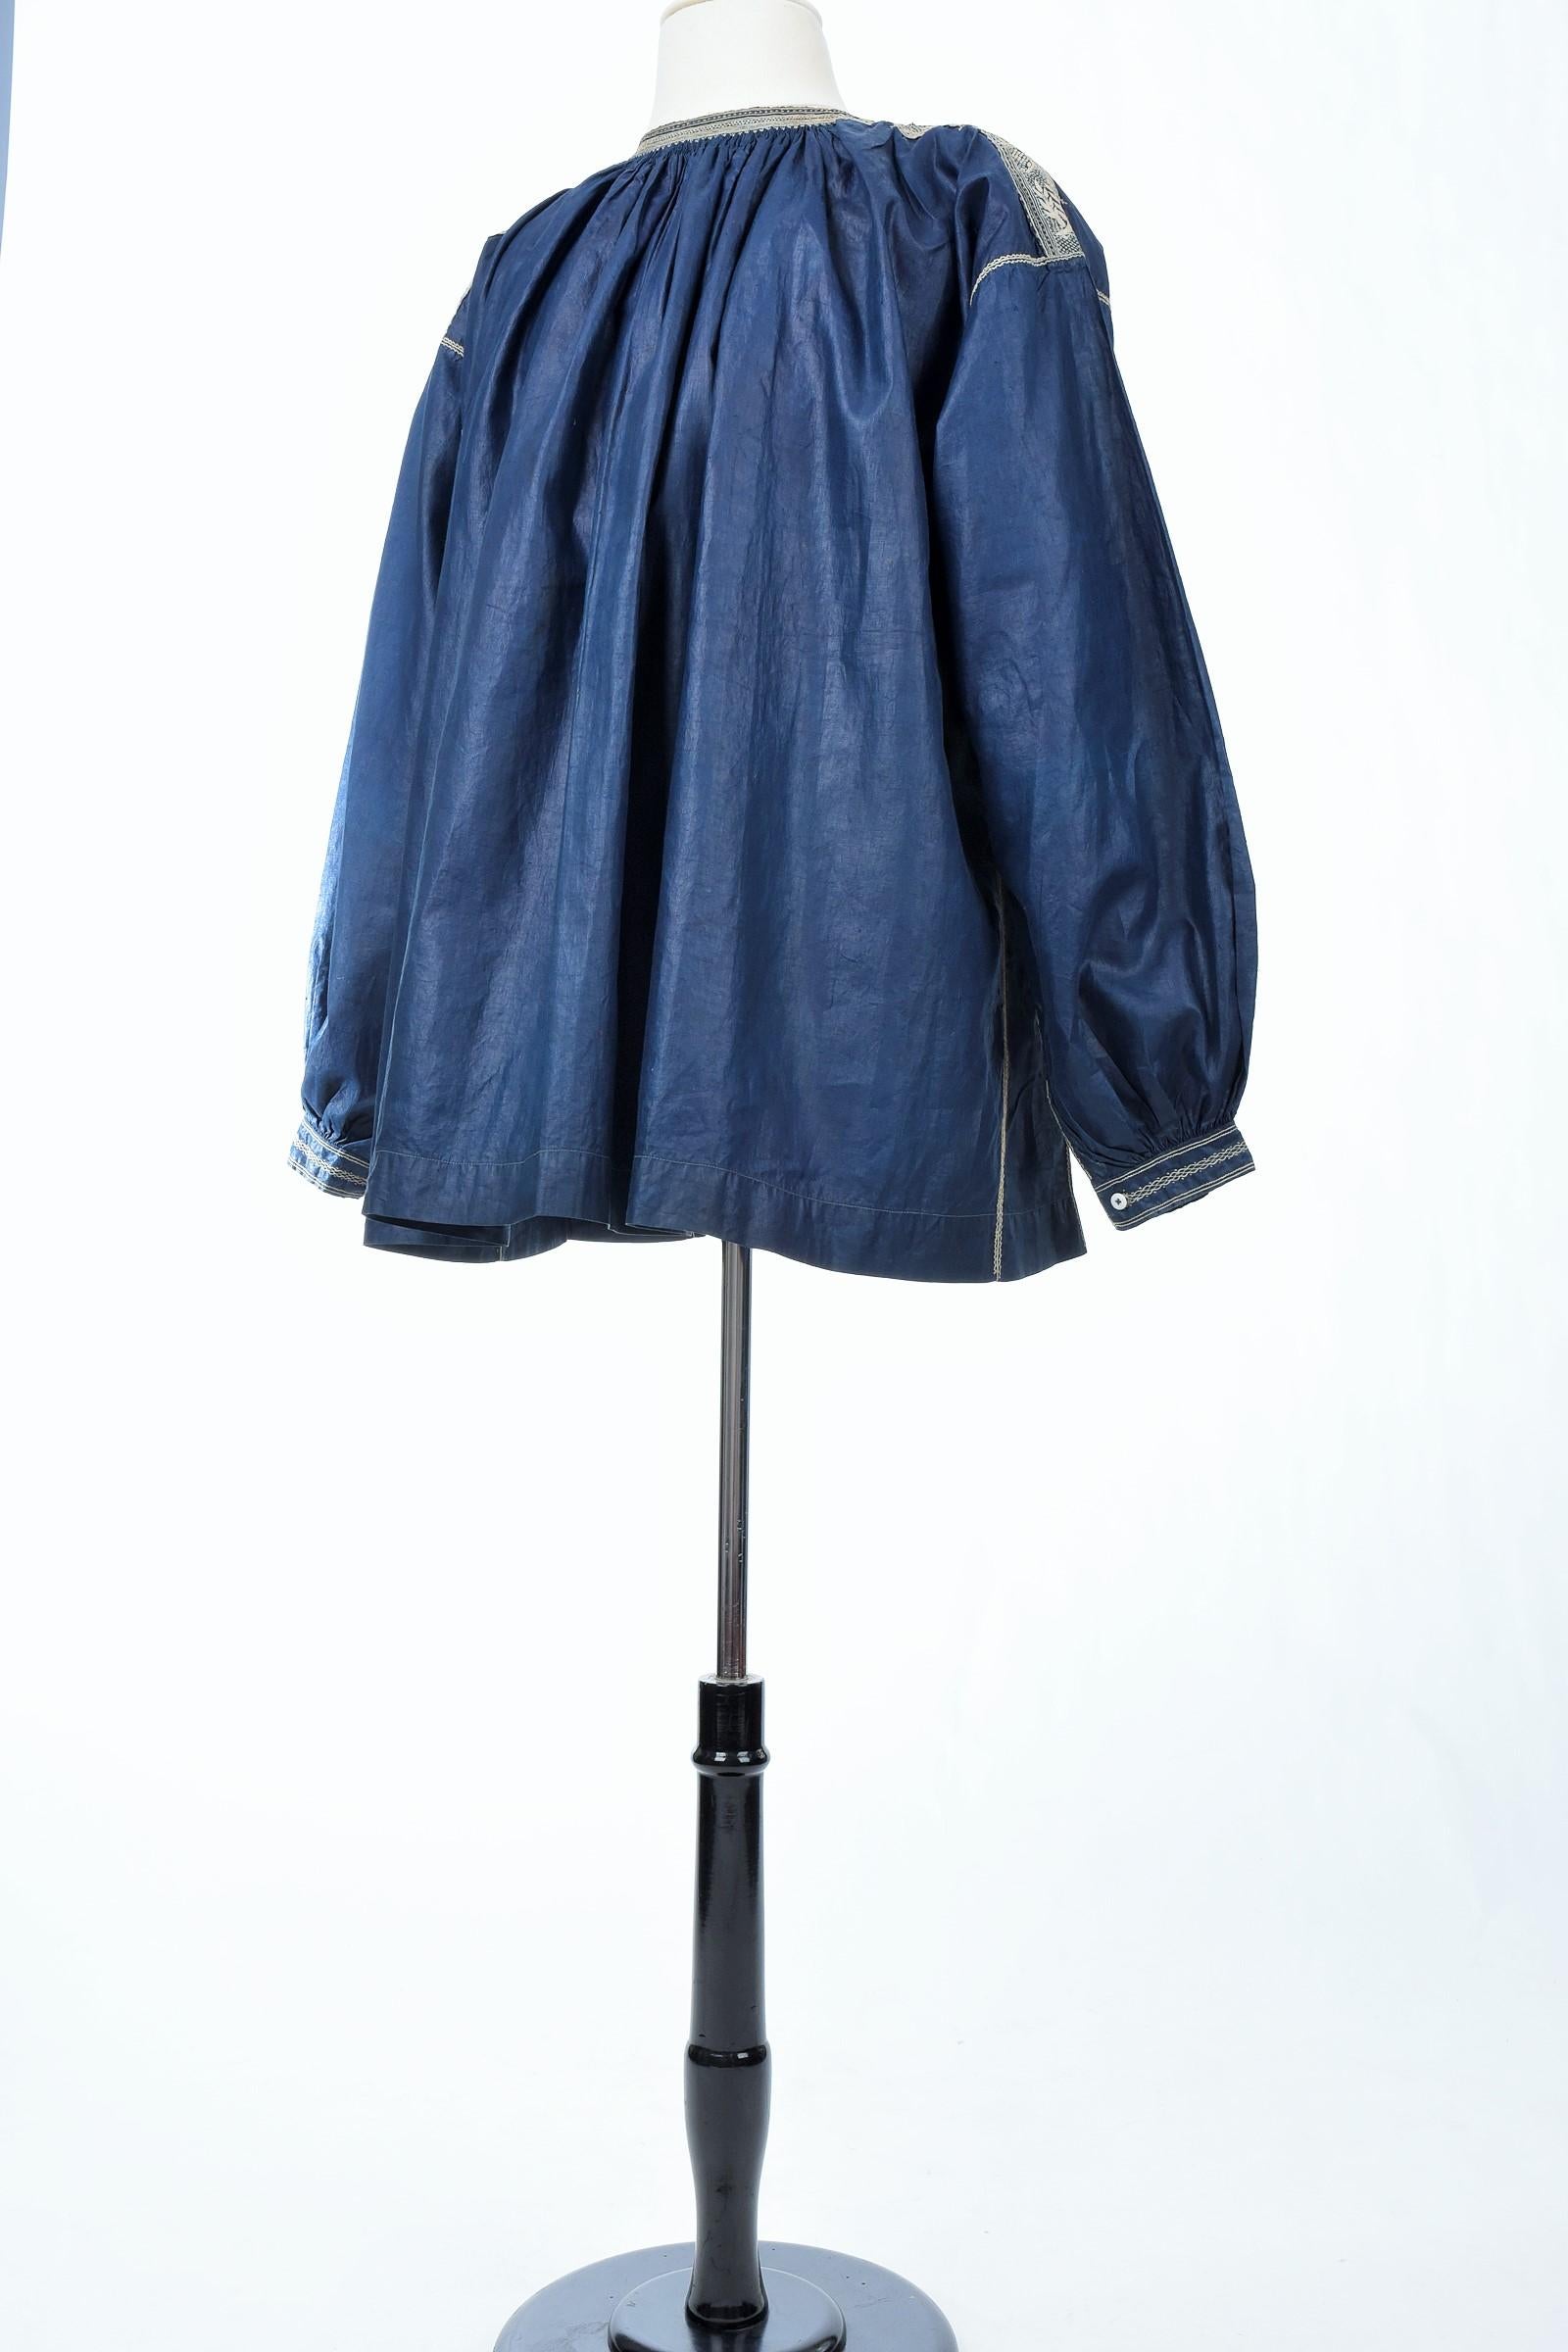 French Blaude or Peasant Blouse In Glazed Linen Dyed Indigo -French 19th Century For Sale 2